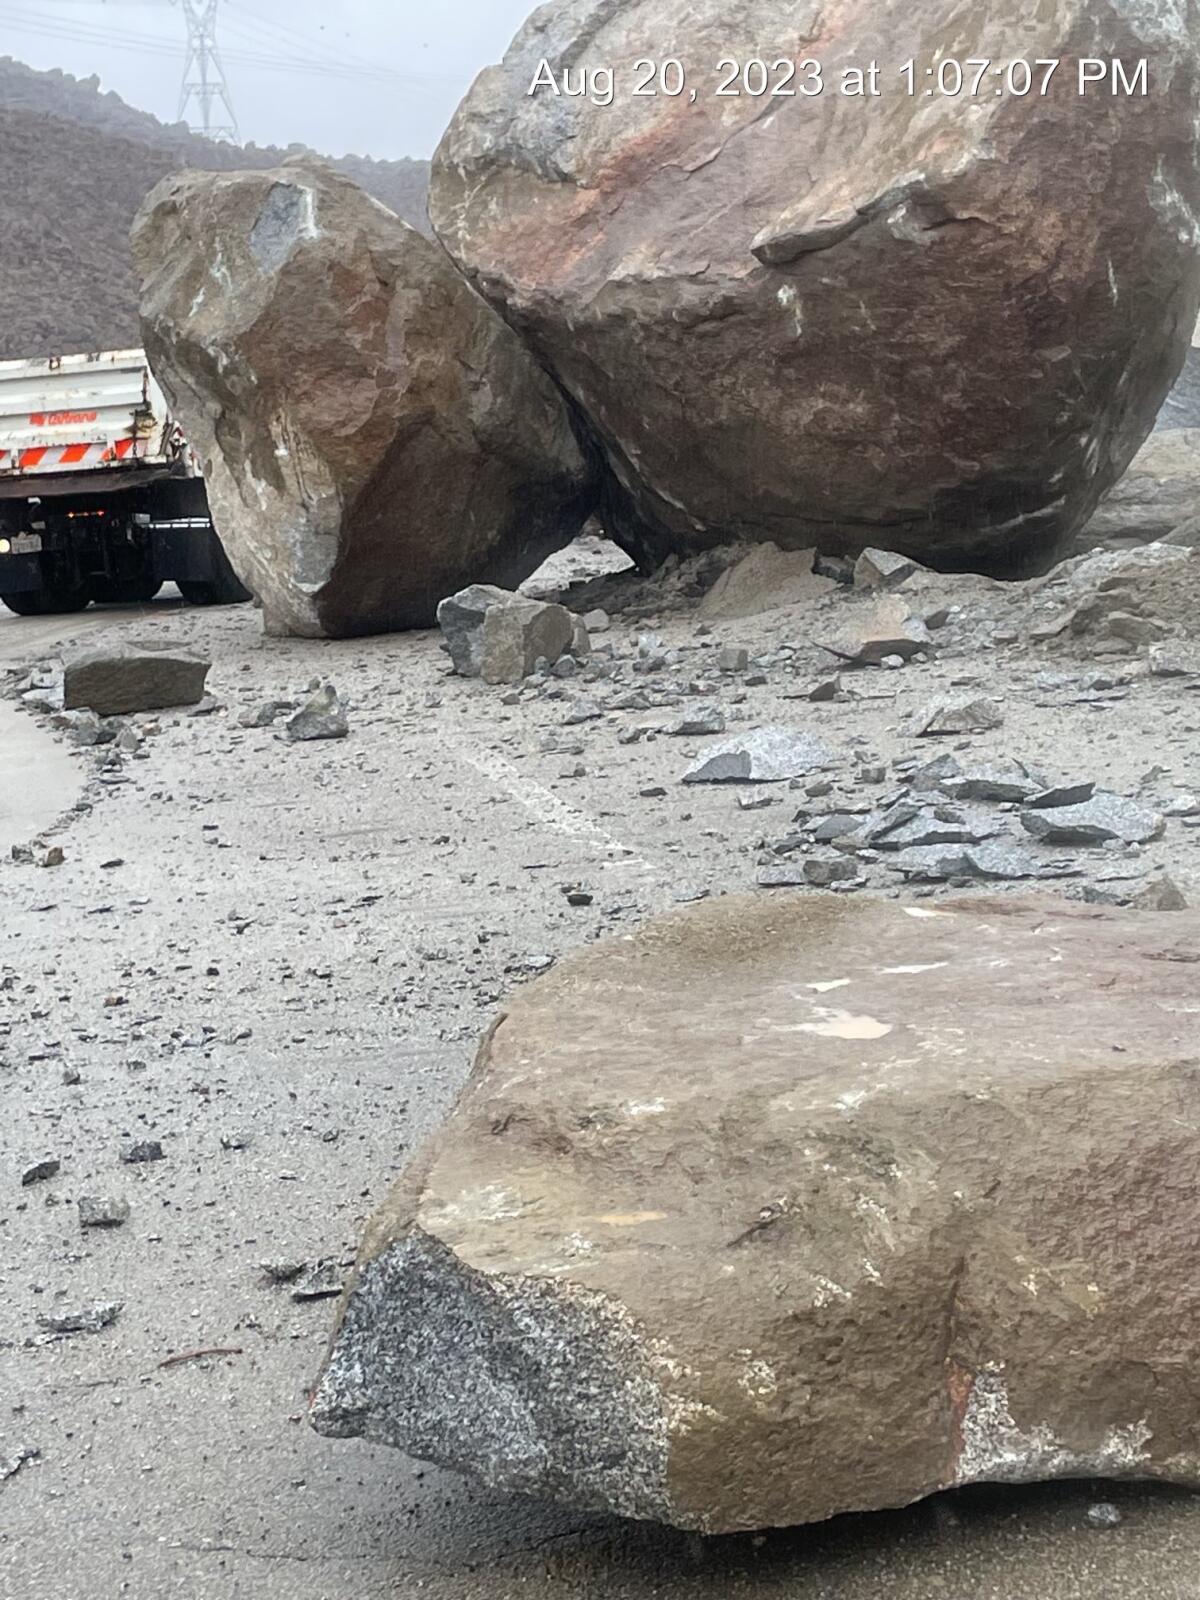 Caltrans crews respond to large boulders on Interstate 8 near In-Ko-Pah.